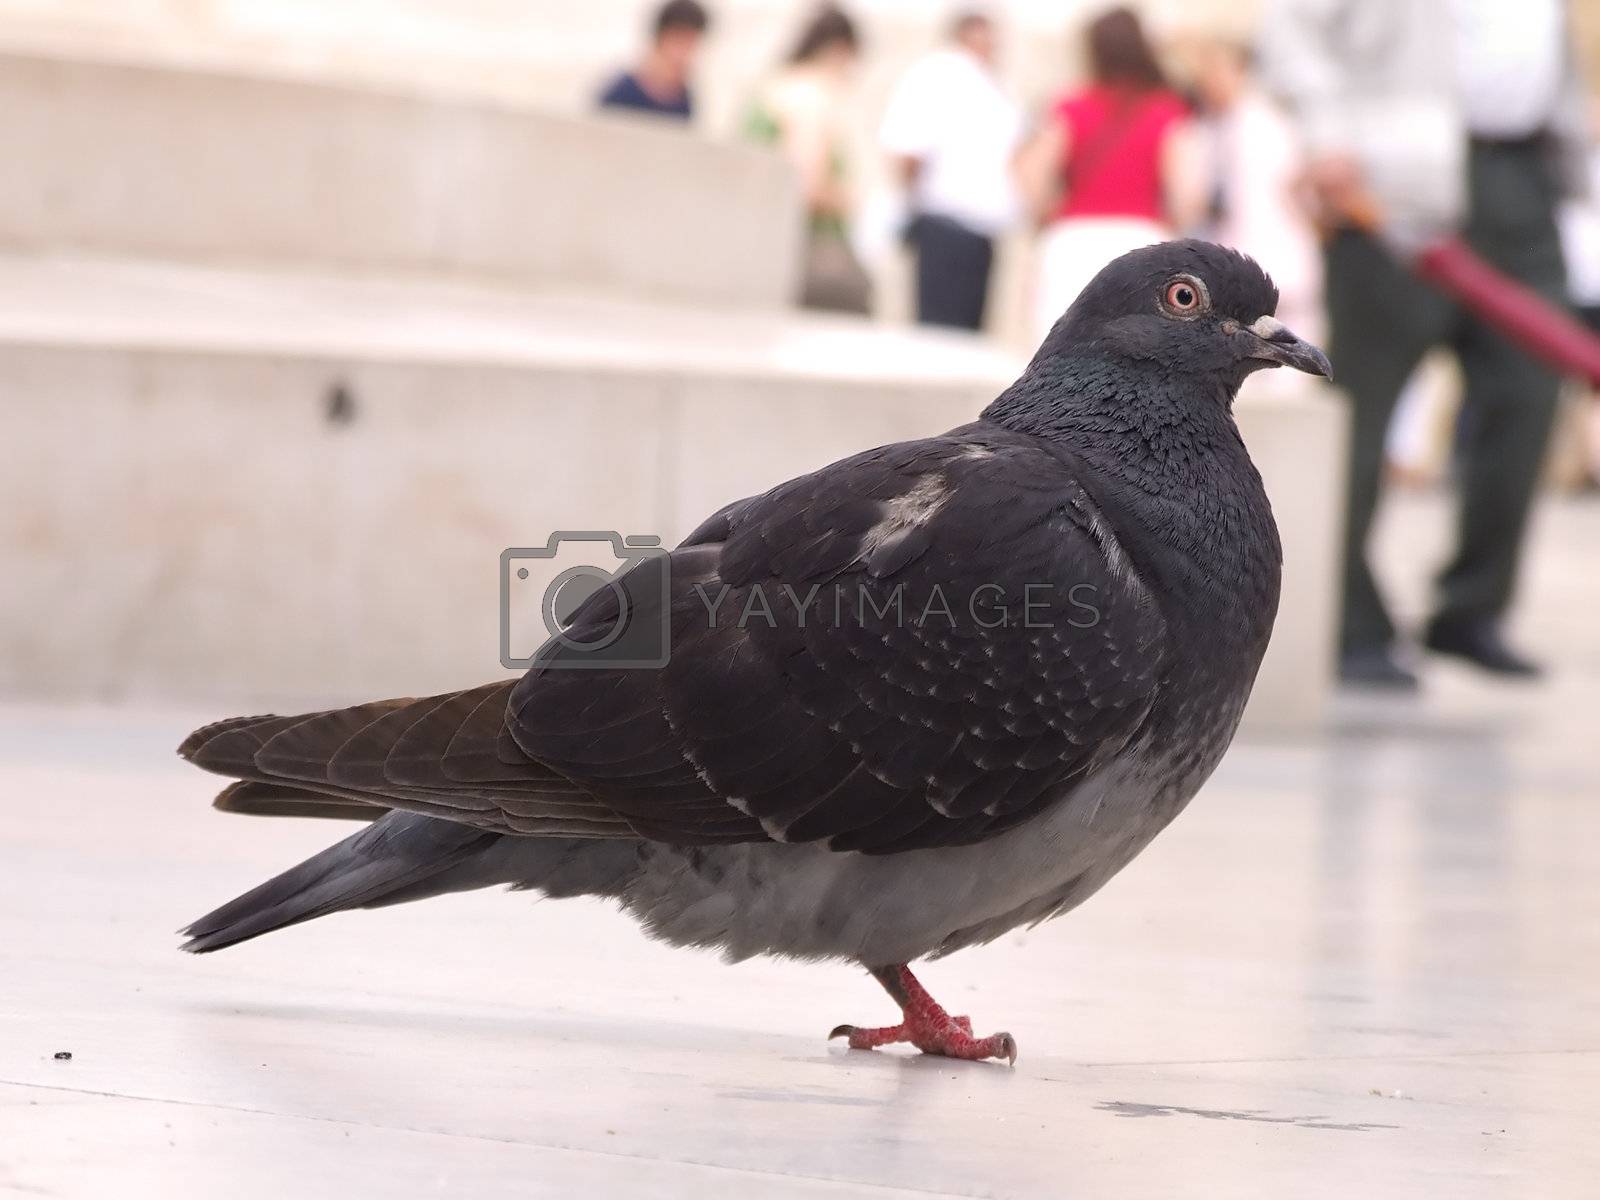 Royalty free image of City pigeon by PauloResende